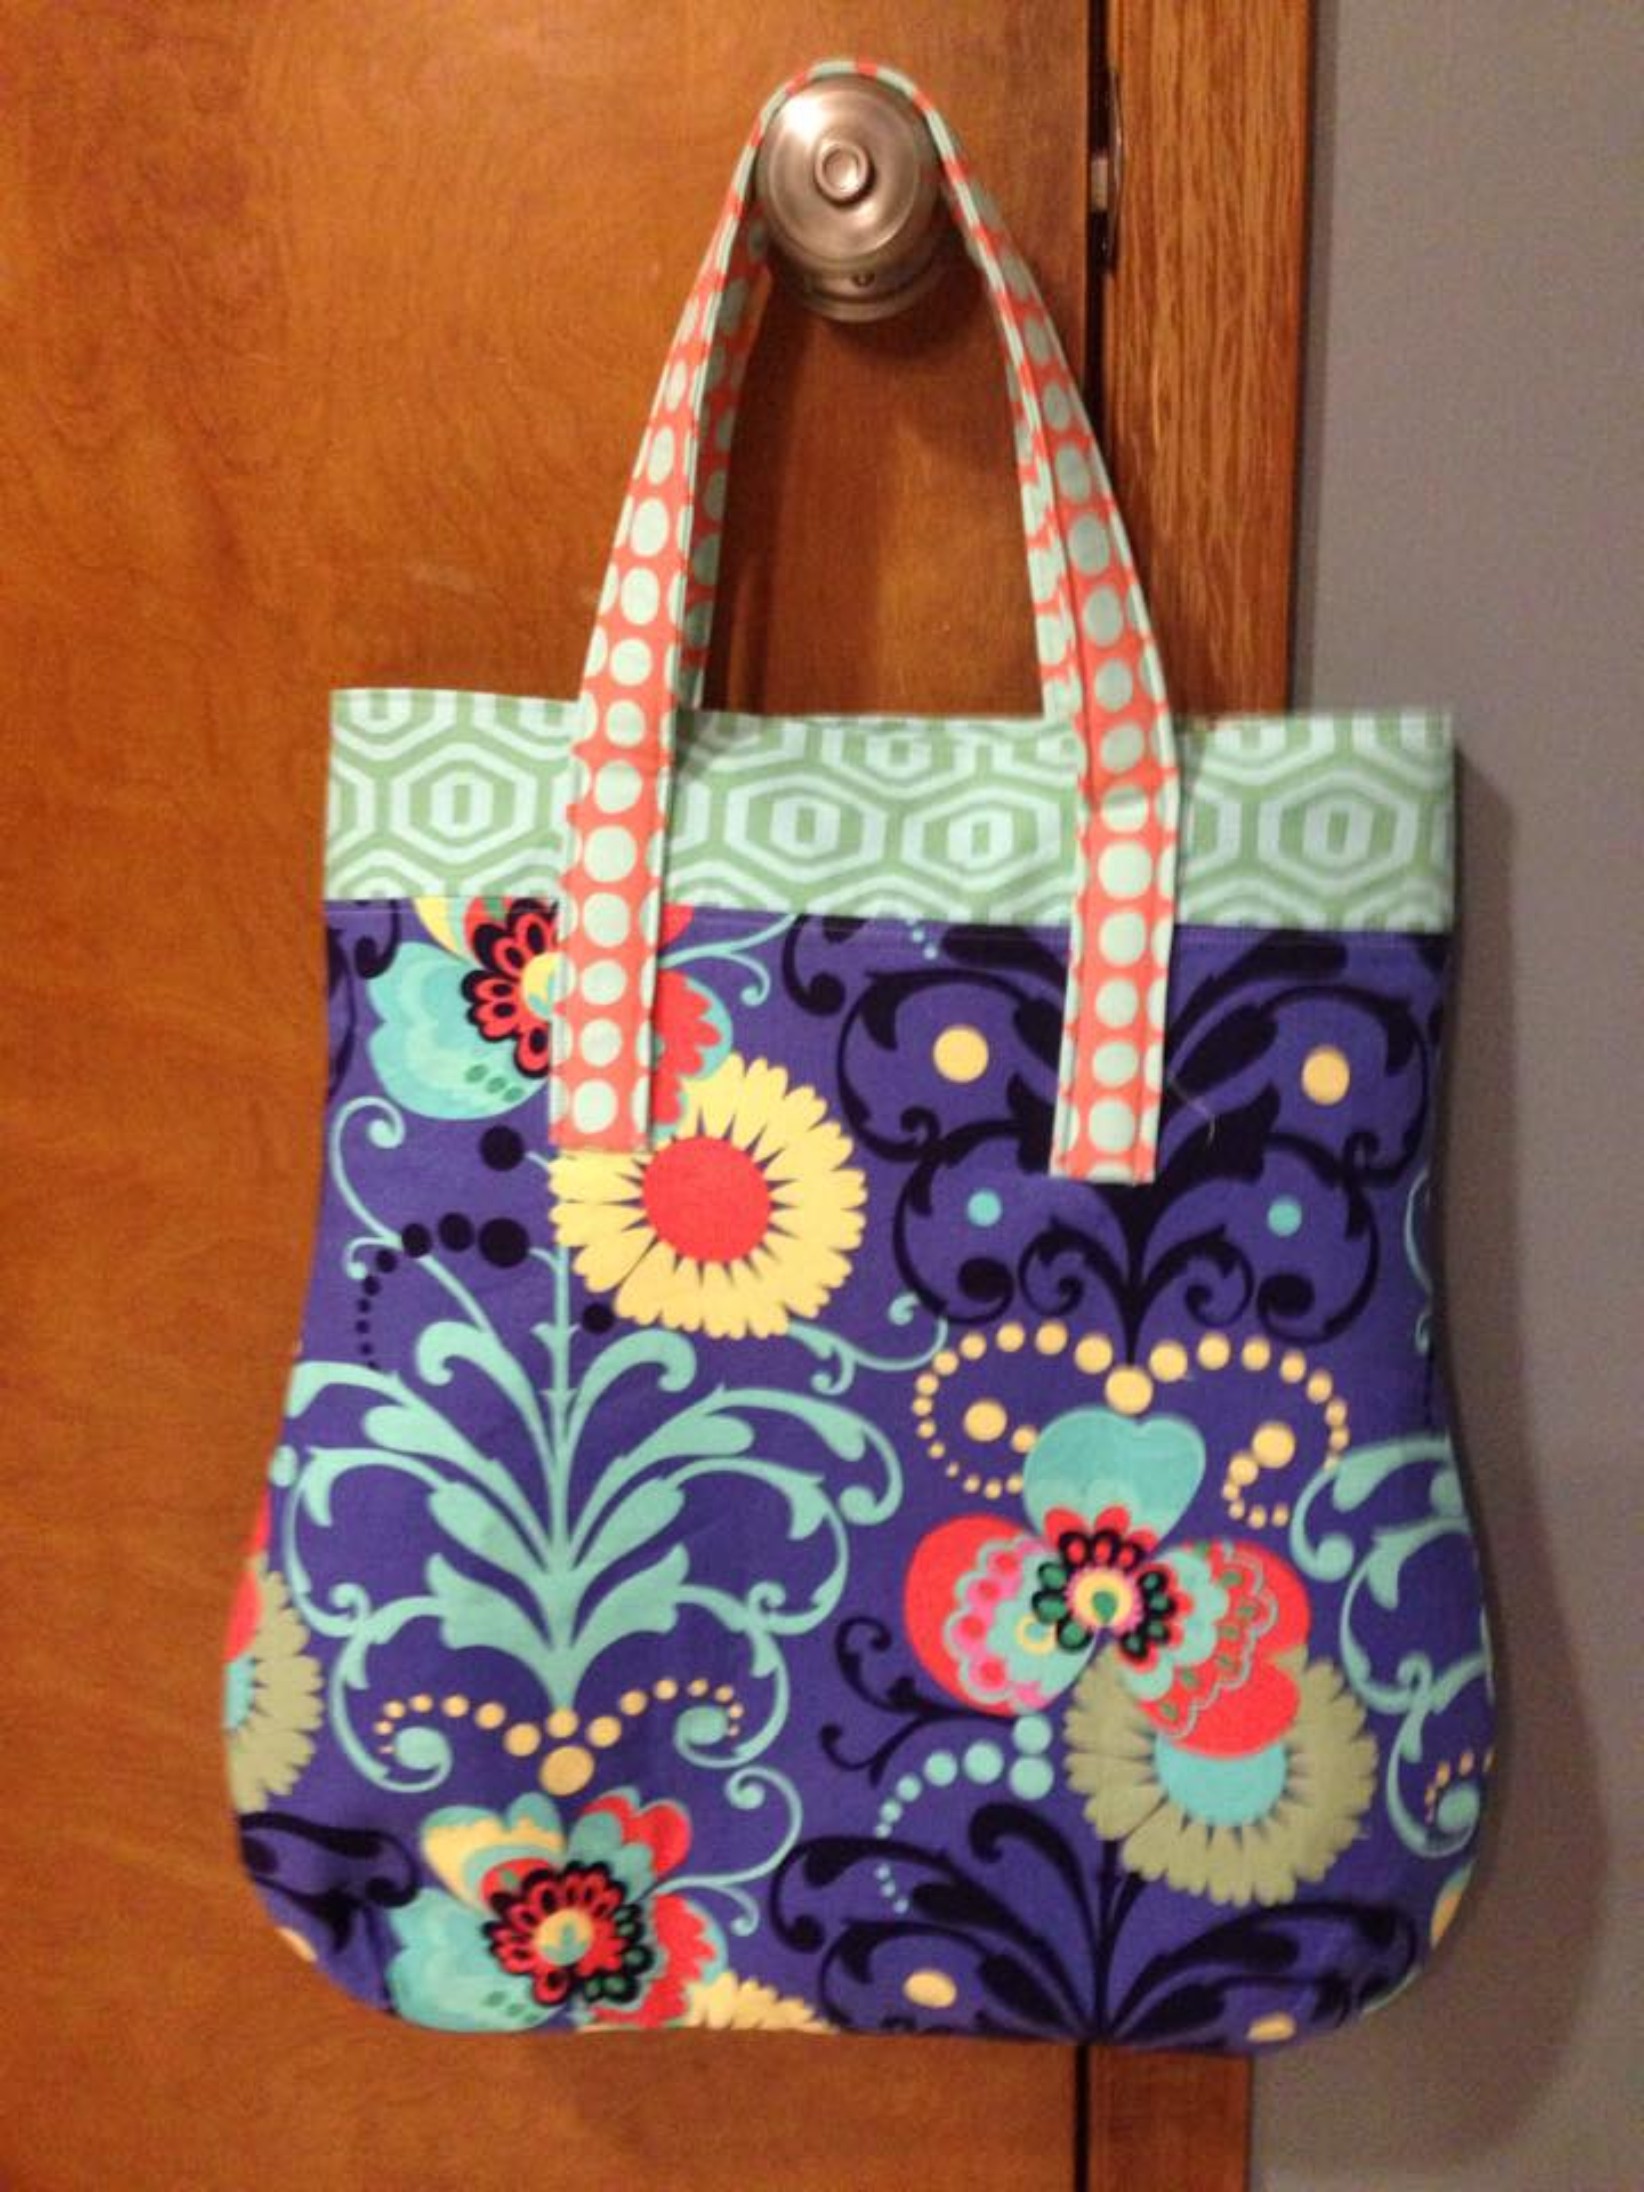 Soho Bag is released! (This is also Tote #10) – Around the Bobbin